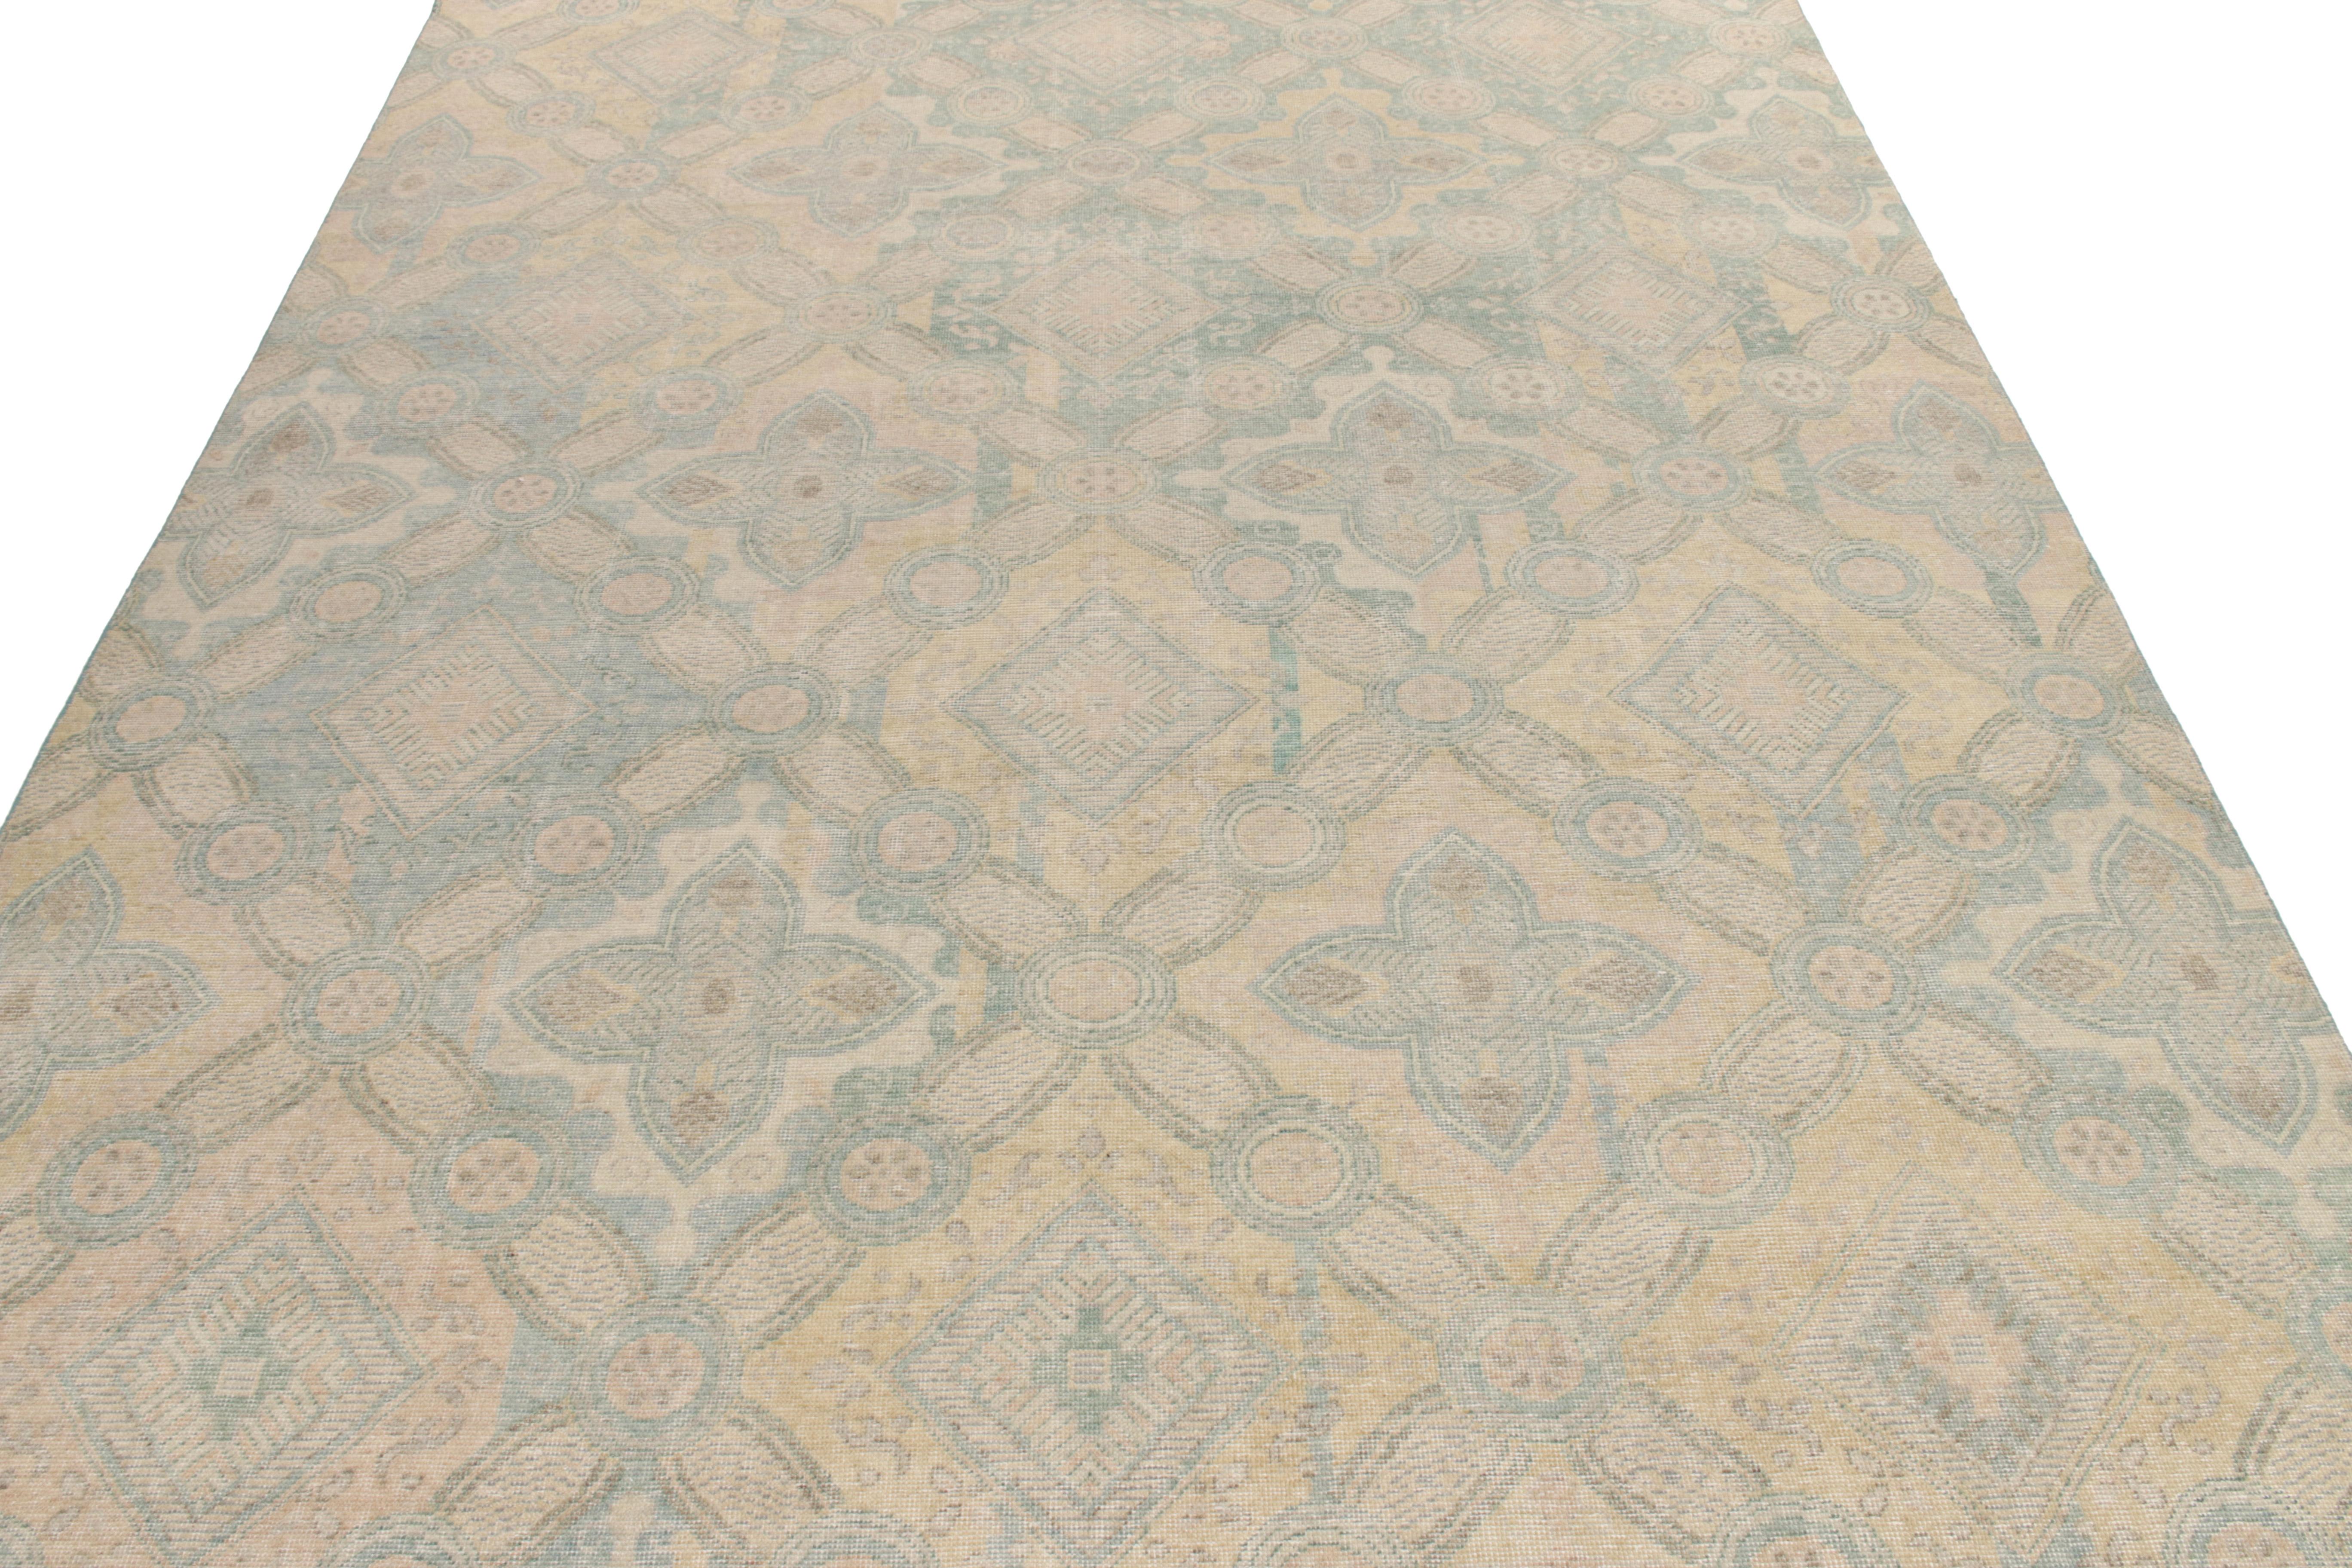 A 9x12 cream and blue floral rug, joining the Homage Collection by Rug & Kilim. Hand knotted in wool, drawing inspiration from European floral motifs akin to English and French Art Deco design sensibilities. 

Further on the Design: Varied color and